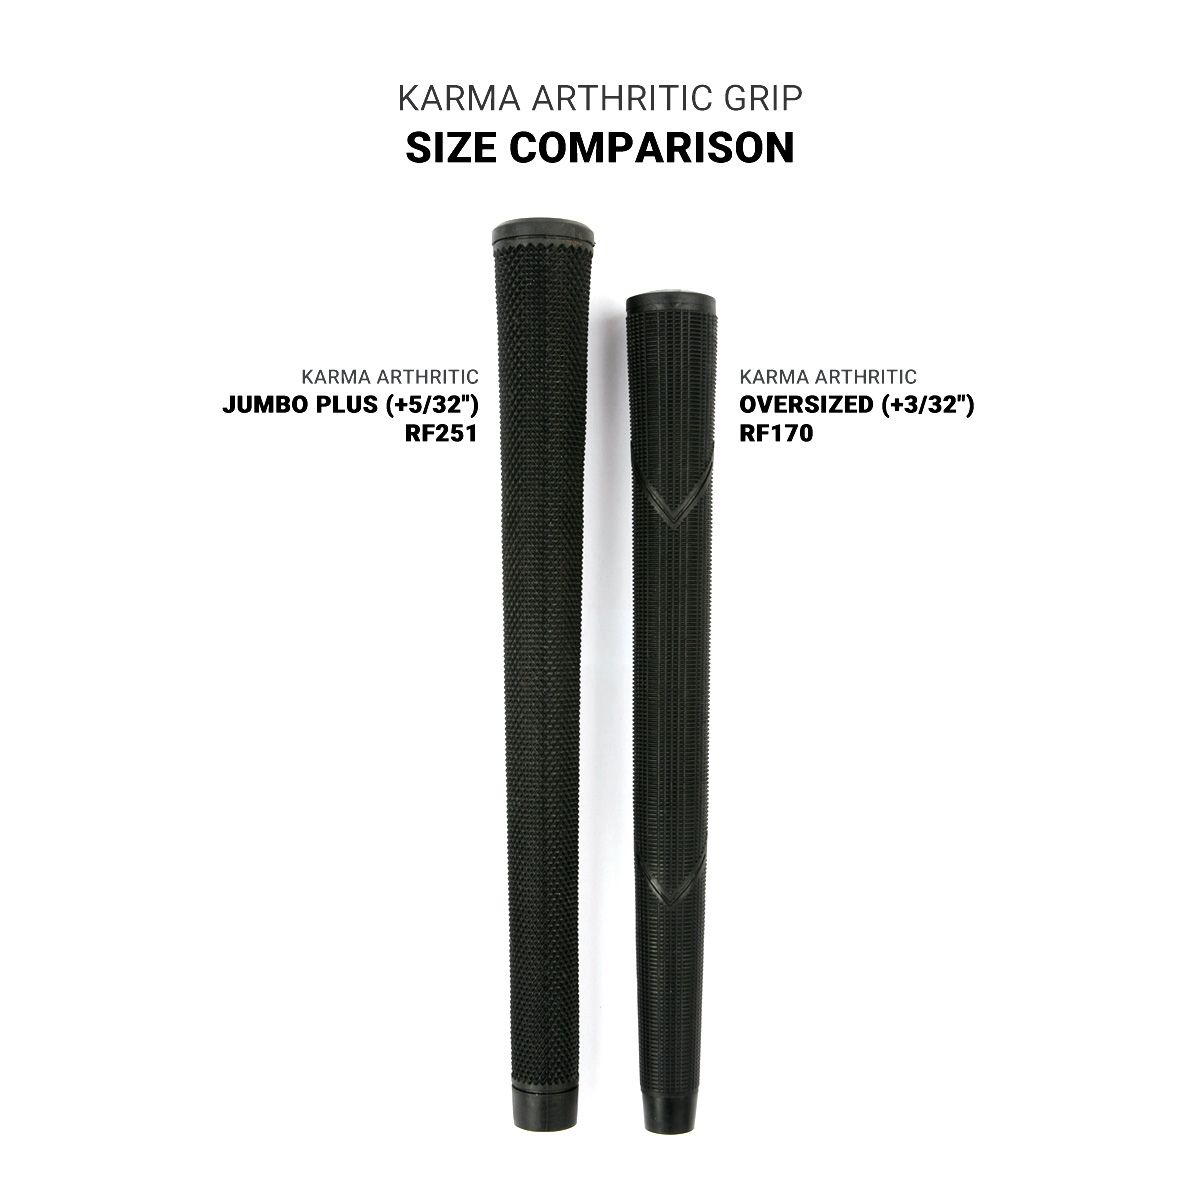 size comparison of the two Karma Arthritic Golf Grips